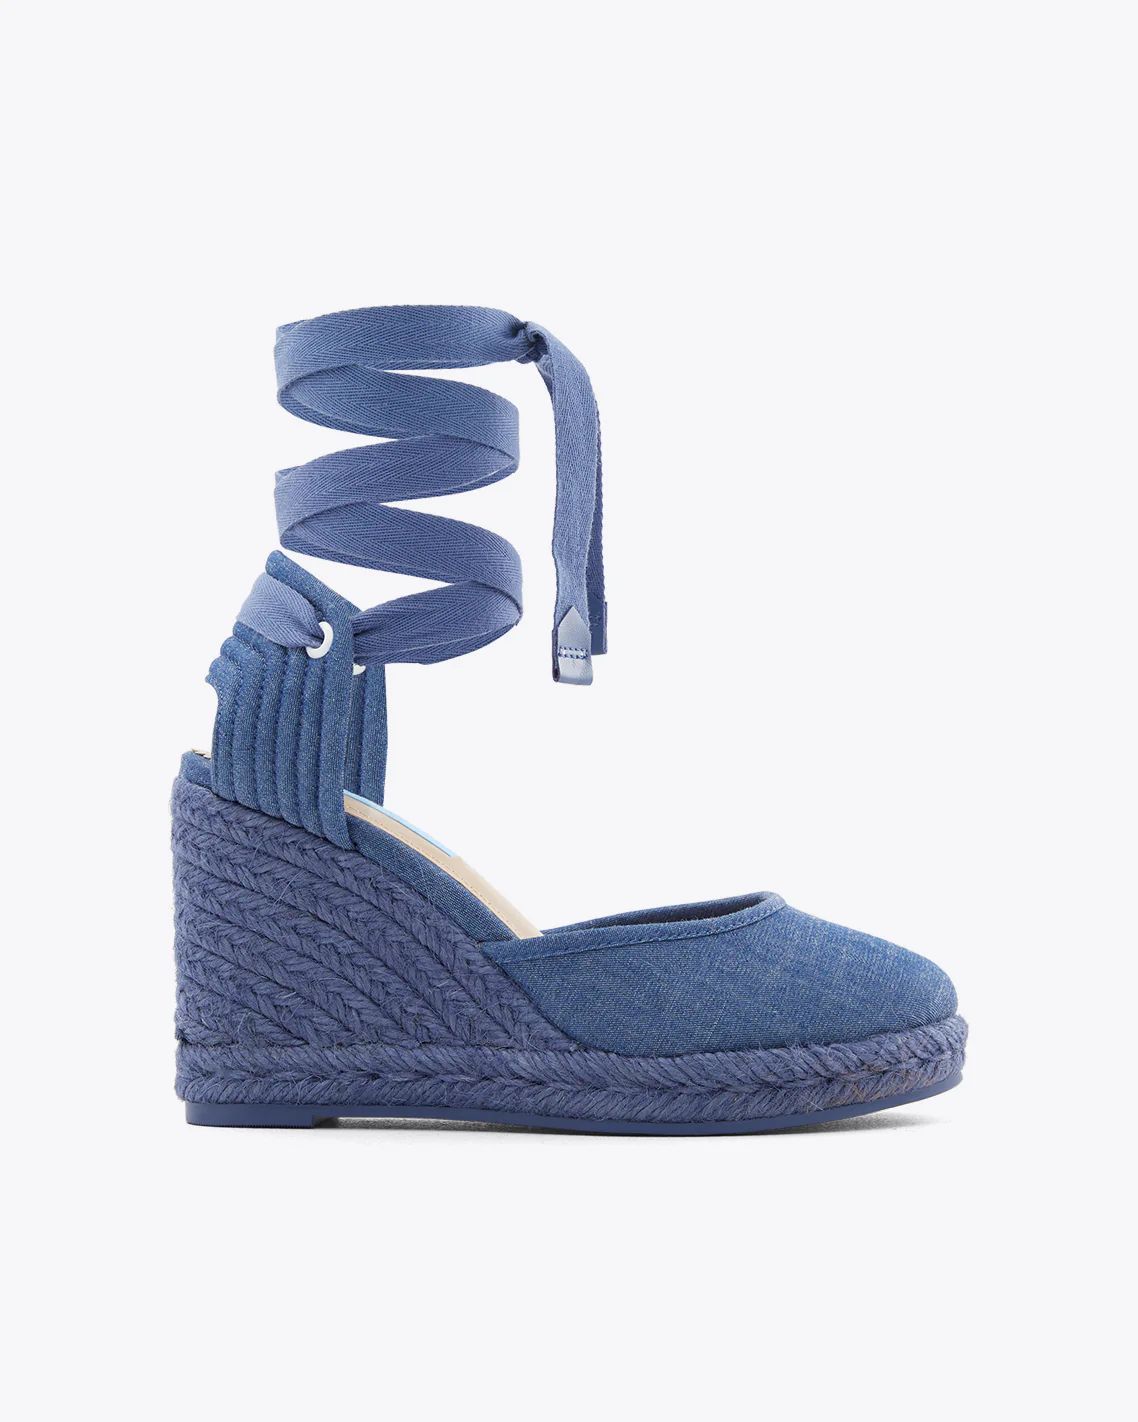 Olivia Espadrille Wedges in Chambray | Draper James (US)